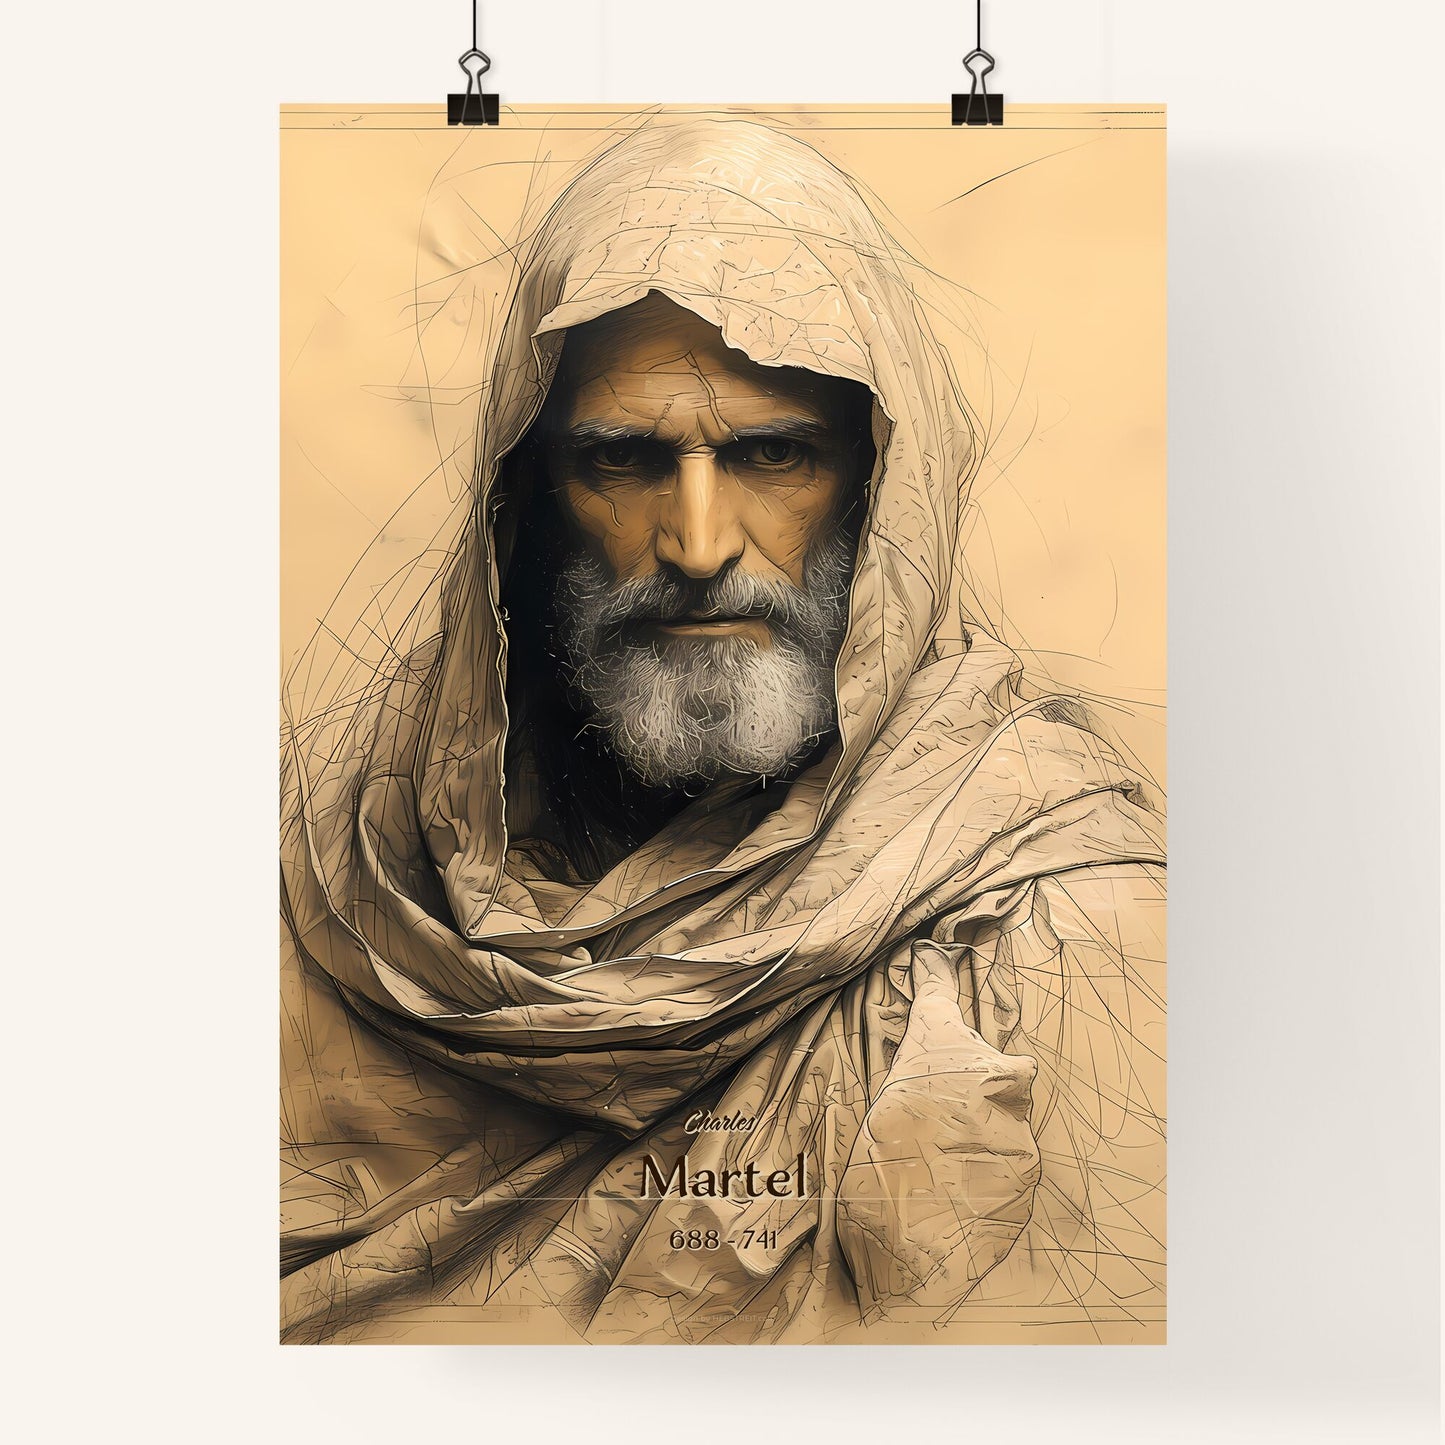 Charles, Martel, 688 - 741, A Poster of a man with a beard wearing a hood Default Title